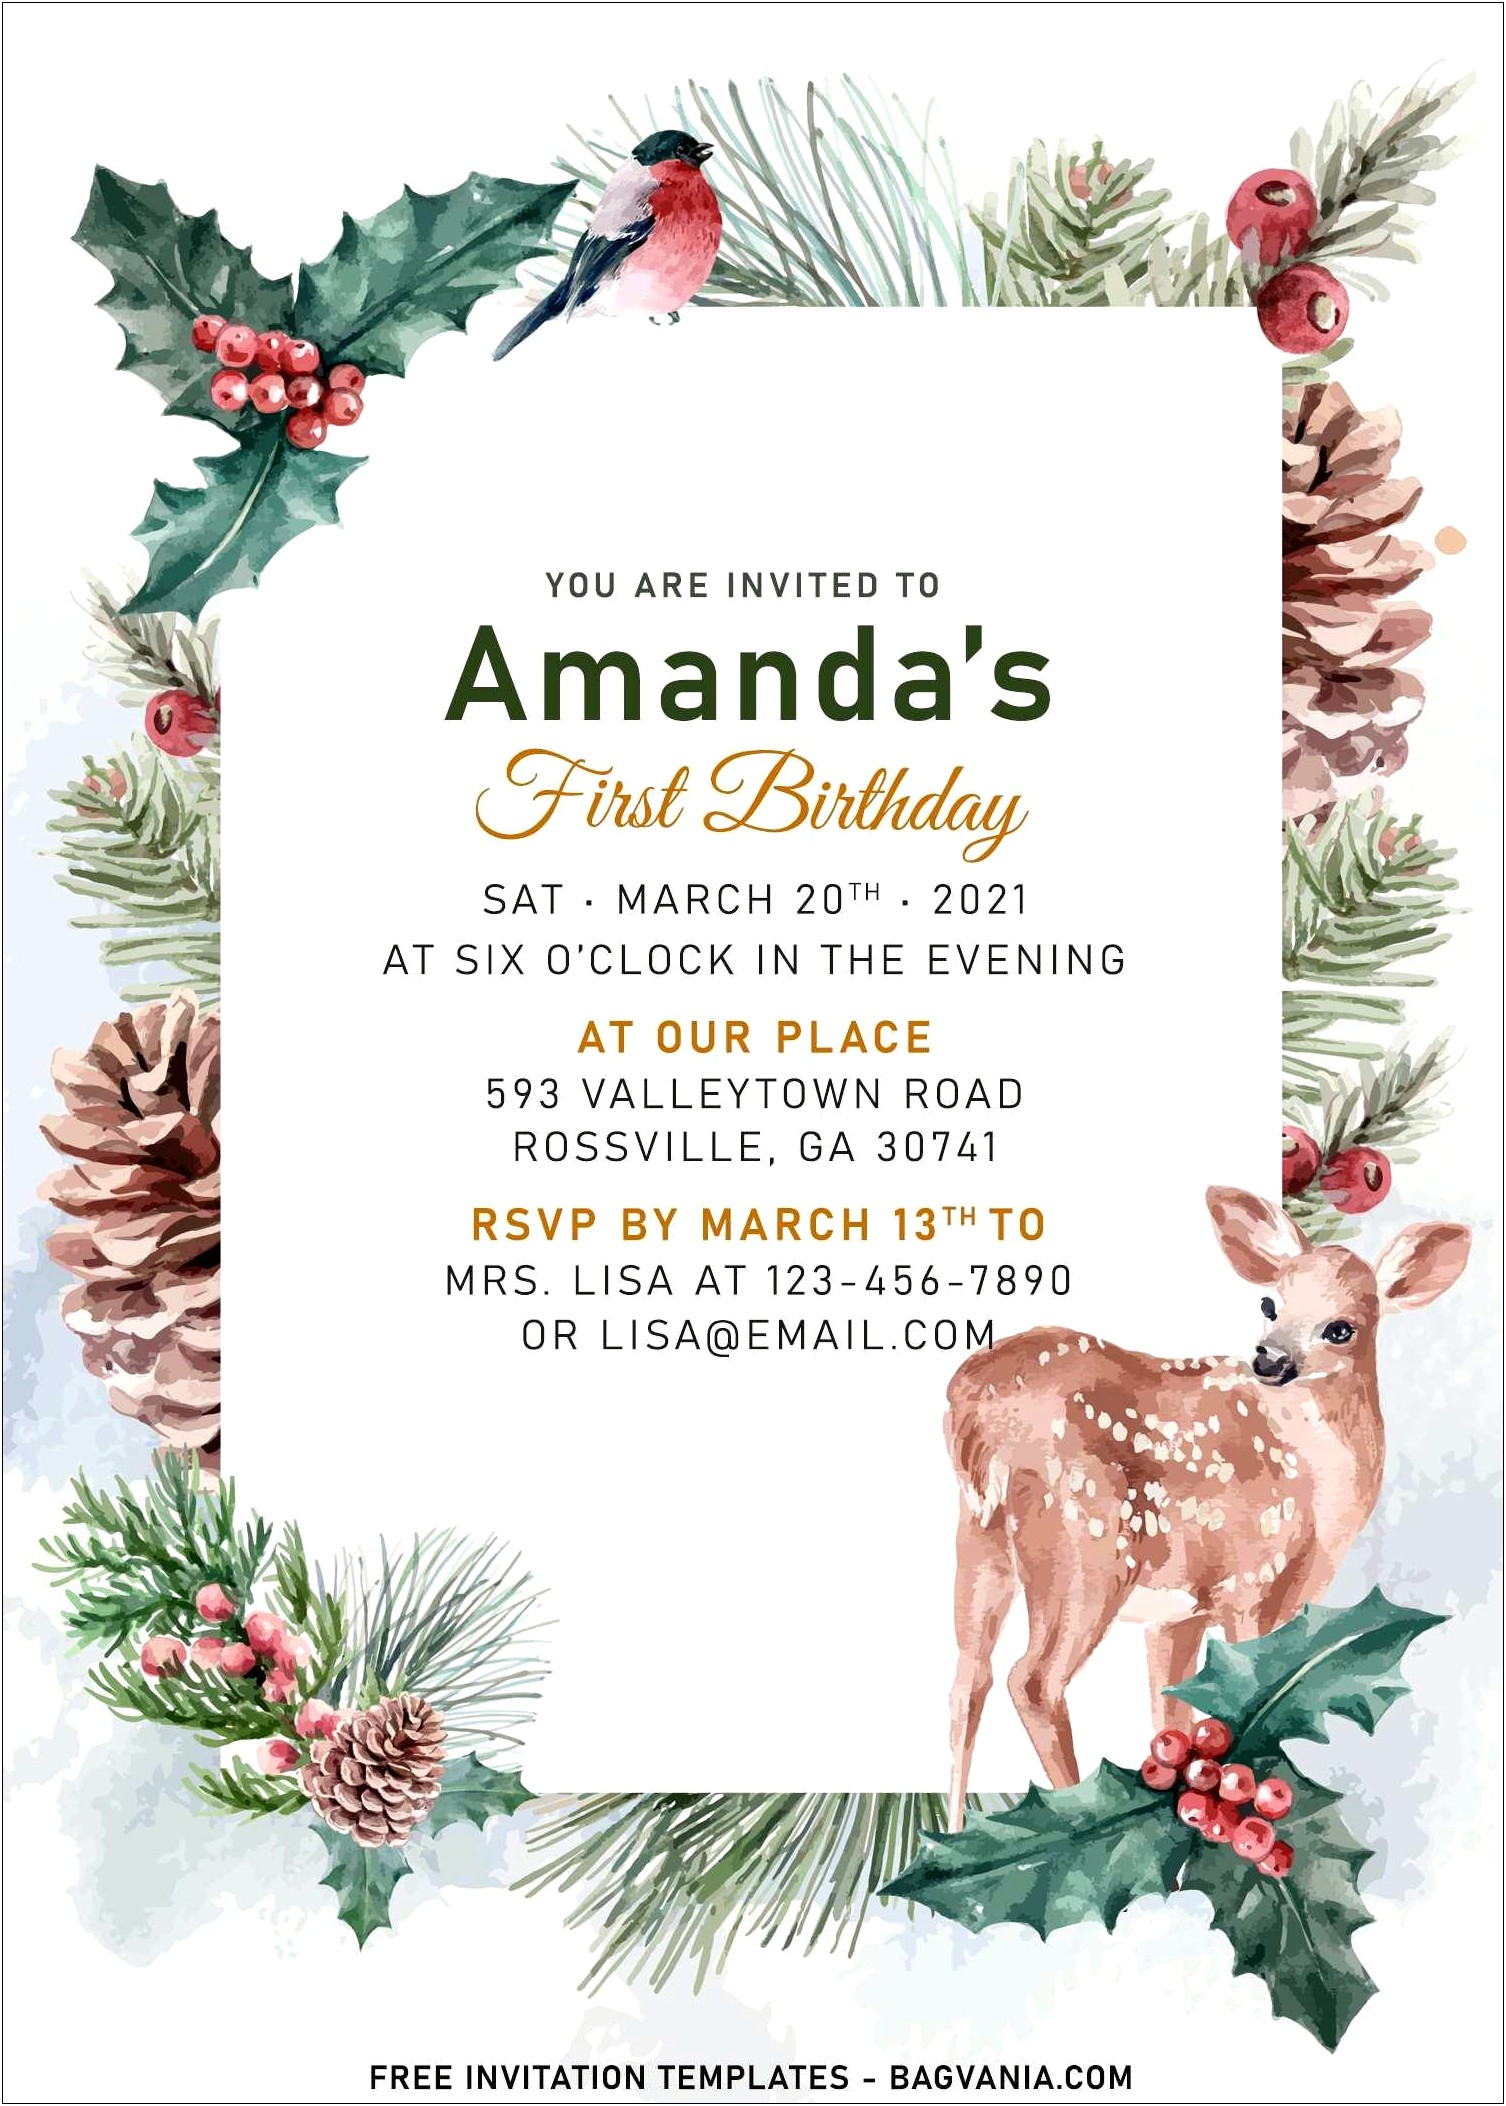 Free Dinner Party Invitation Templates To Email